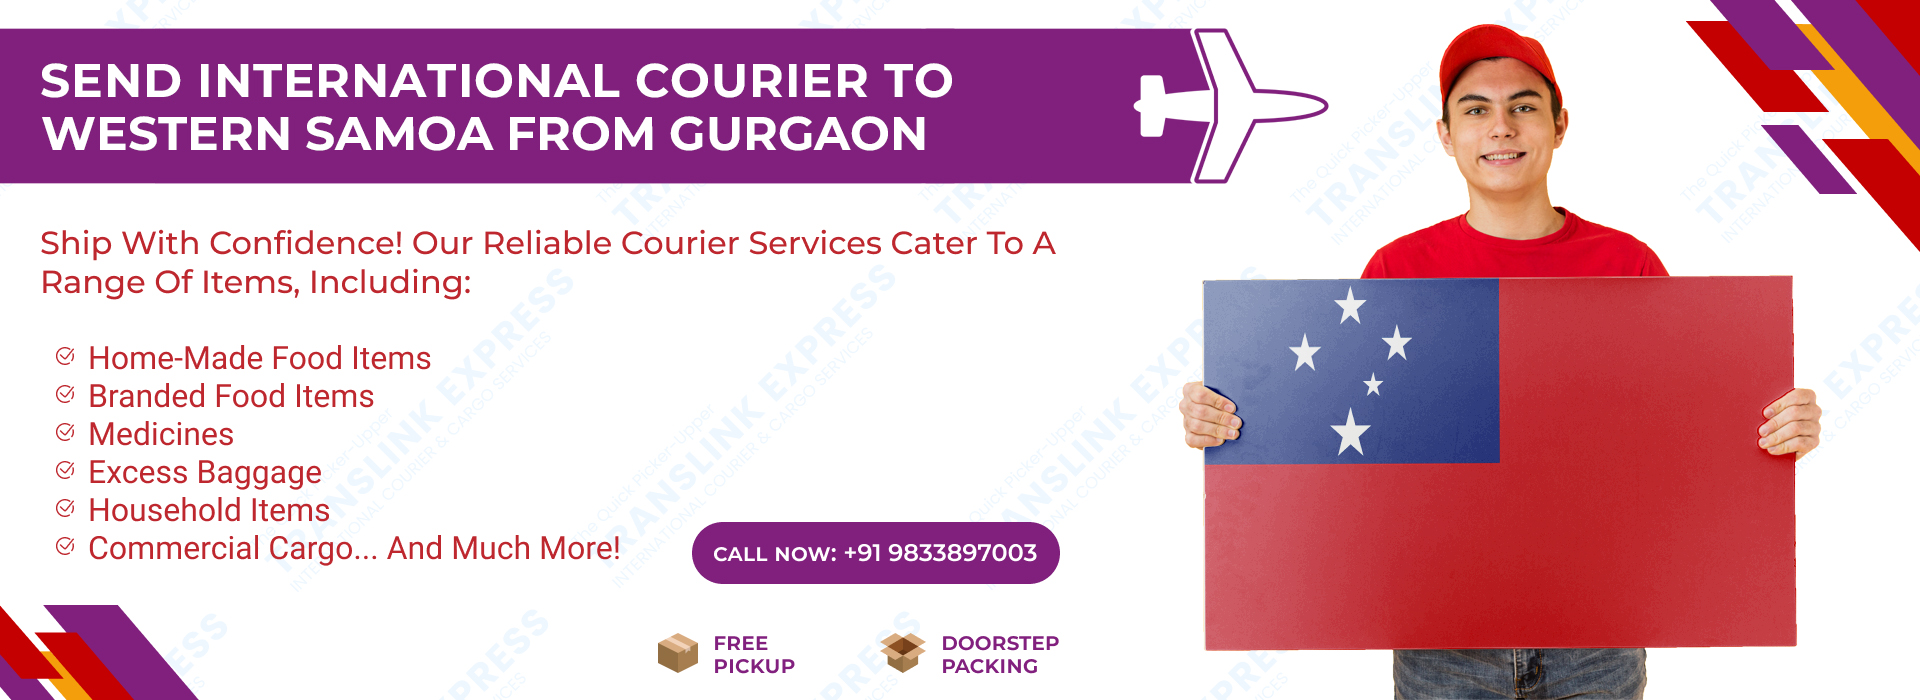 Courier to Western Samoa From Gurgaon